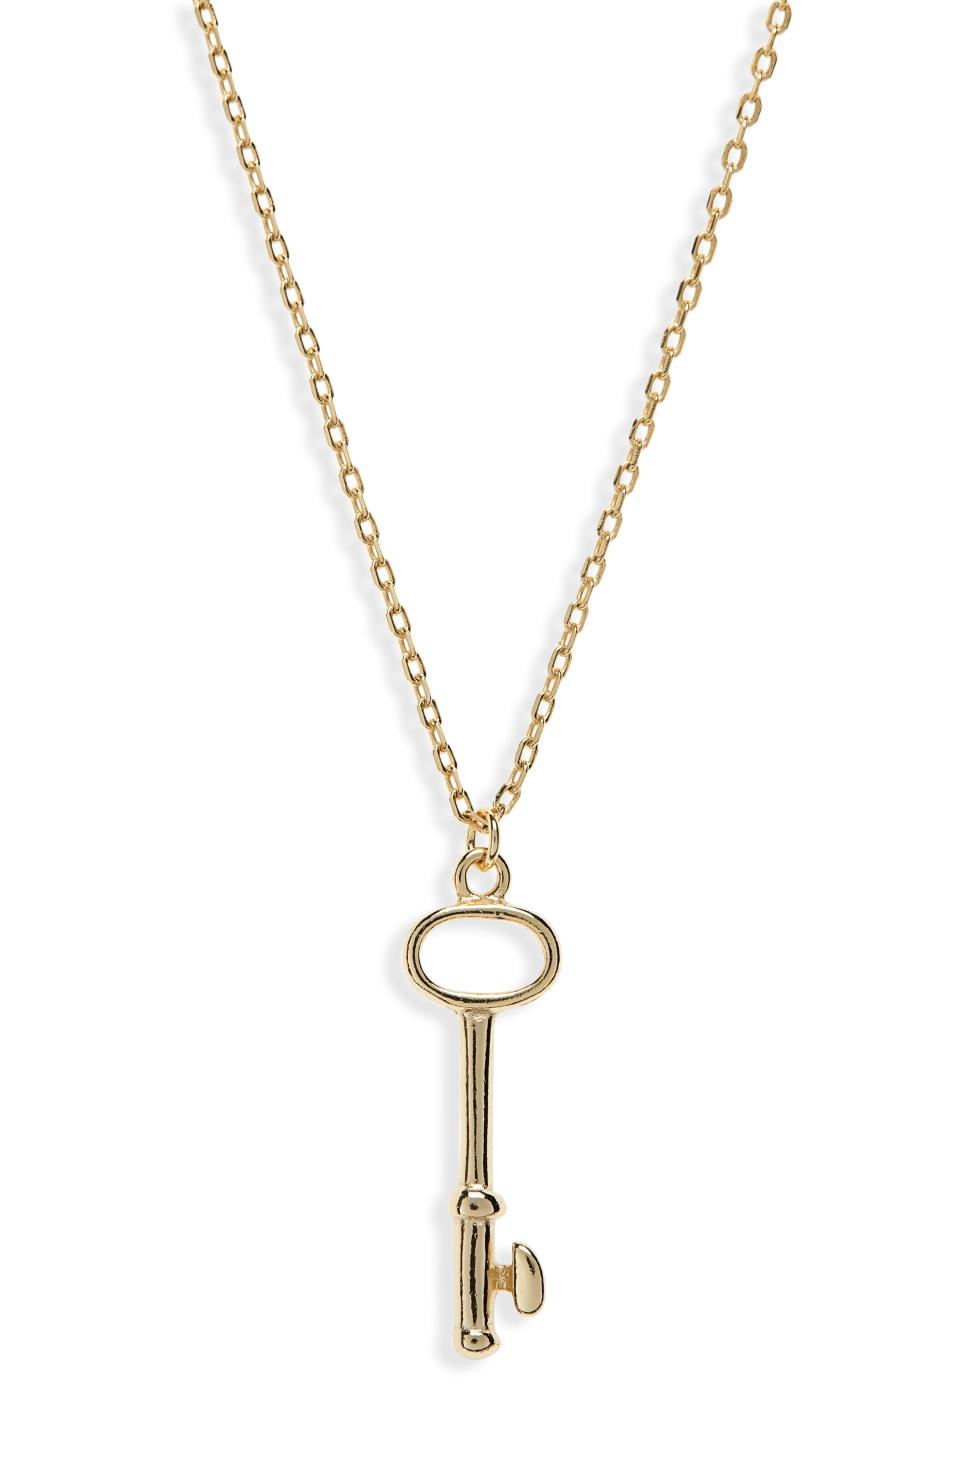 3) A Whimsical Key Necklace That'll Get All the Compliments